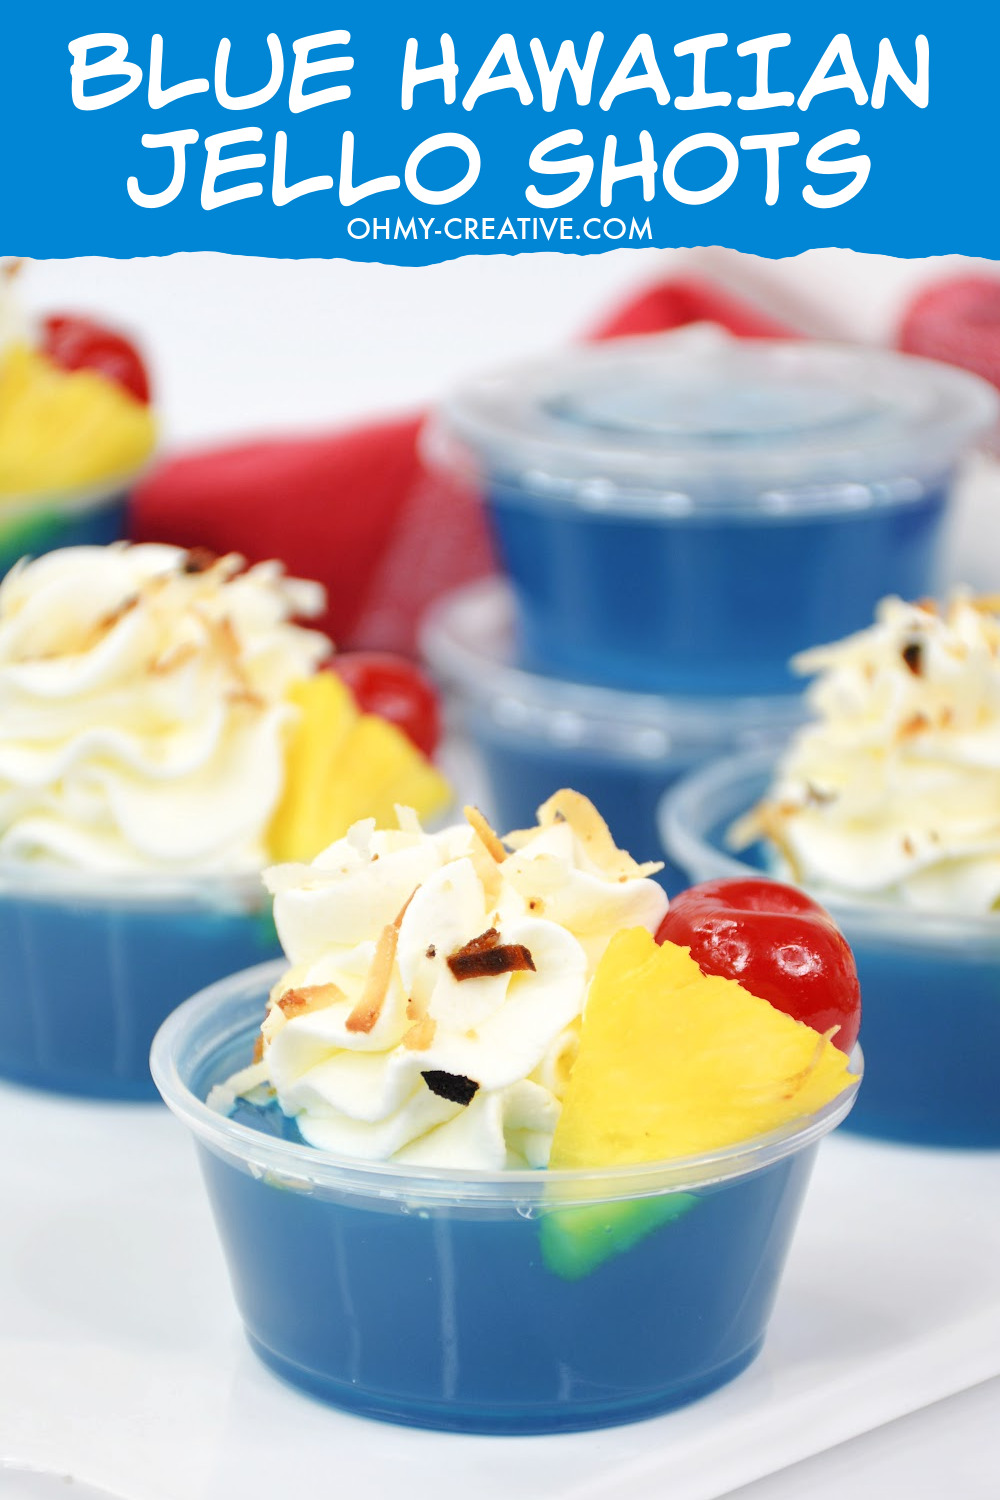 These blue Hawaiian jello shots are made with tasty berry blue jello topped with whipped cream, toasted coconut garnished with pineapple and a maraschino cherry. These jello shots are sitting on a red checked napkin on a white background. 